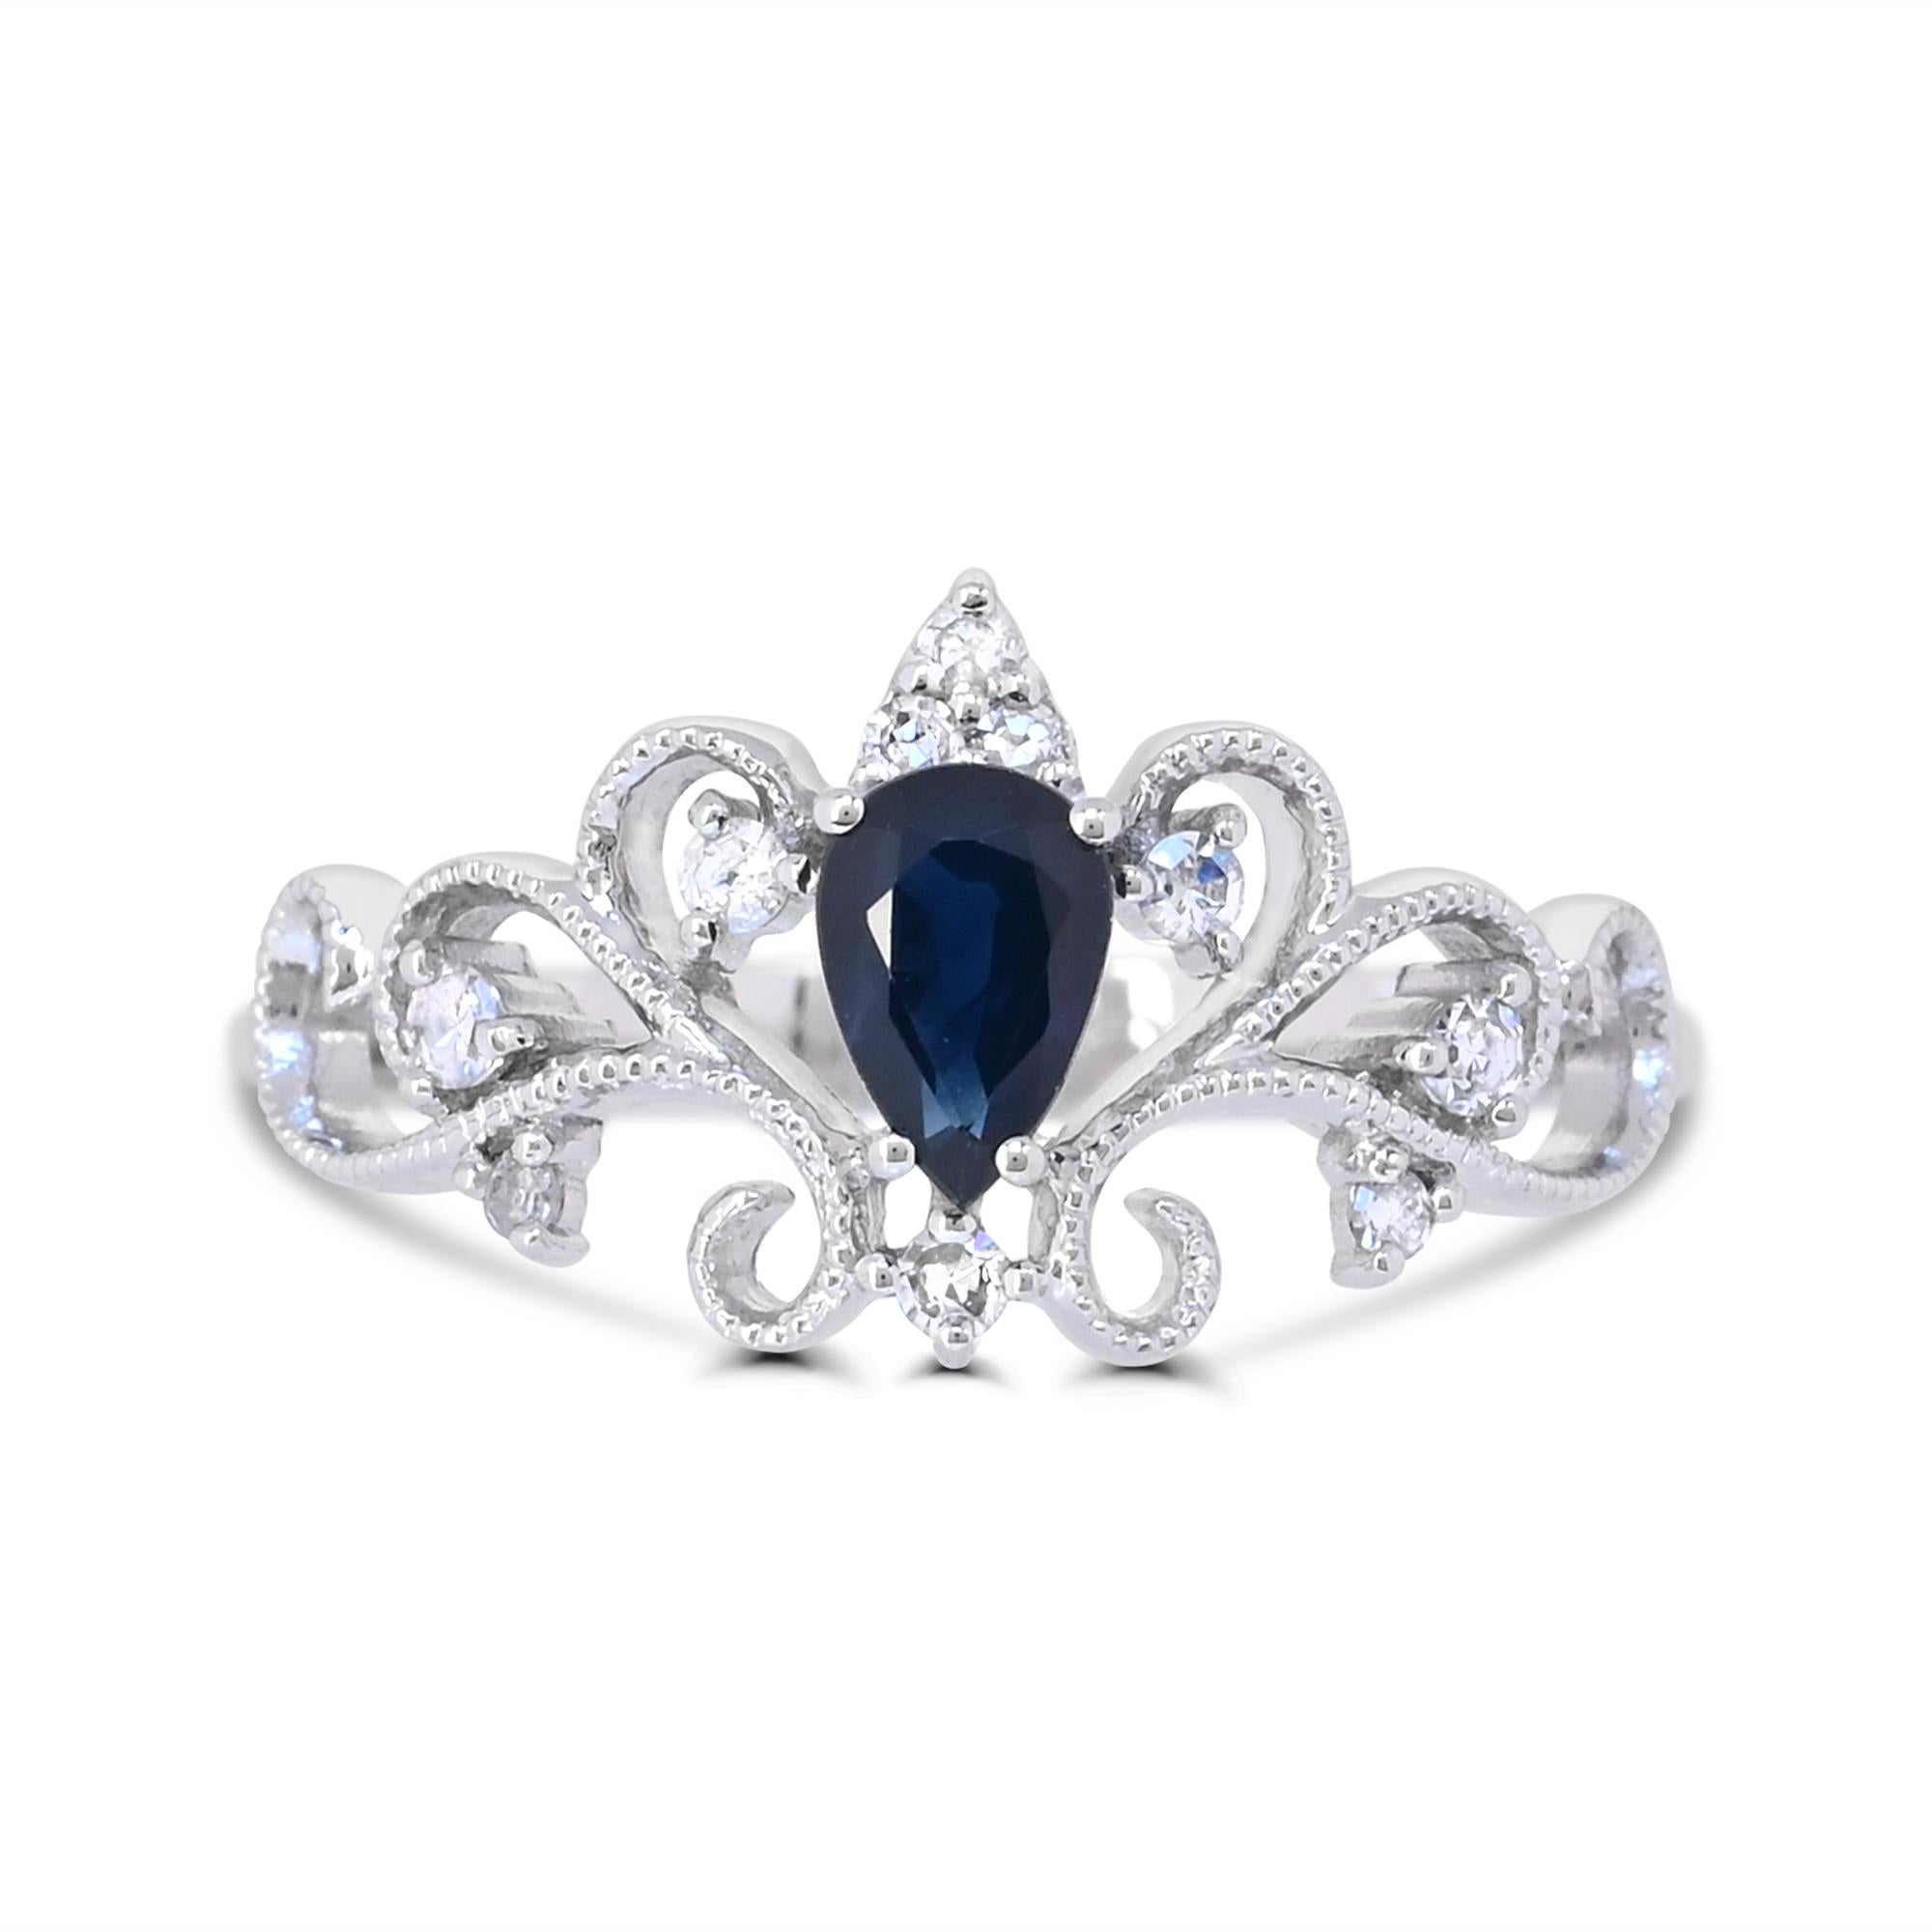 Indulge in the elegance of our Pear-Cut Sapphire and Diamond Accent Curvilinear Milgrain Shank Ring in 14K White Gold. Crafted with meticulous attention to detail, this ring boasts a stunning combination of one pear-cut blue sapphire accented by